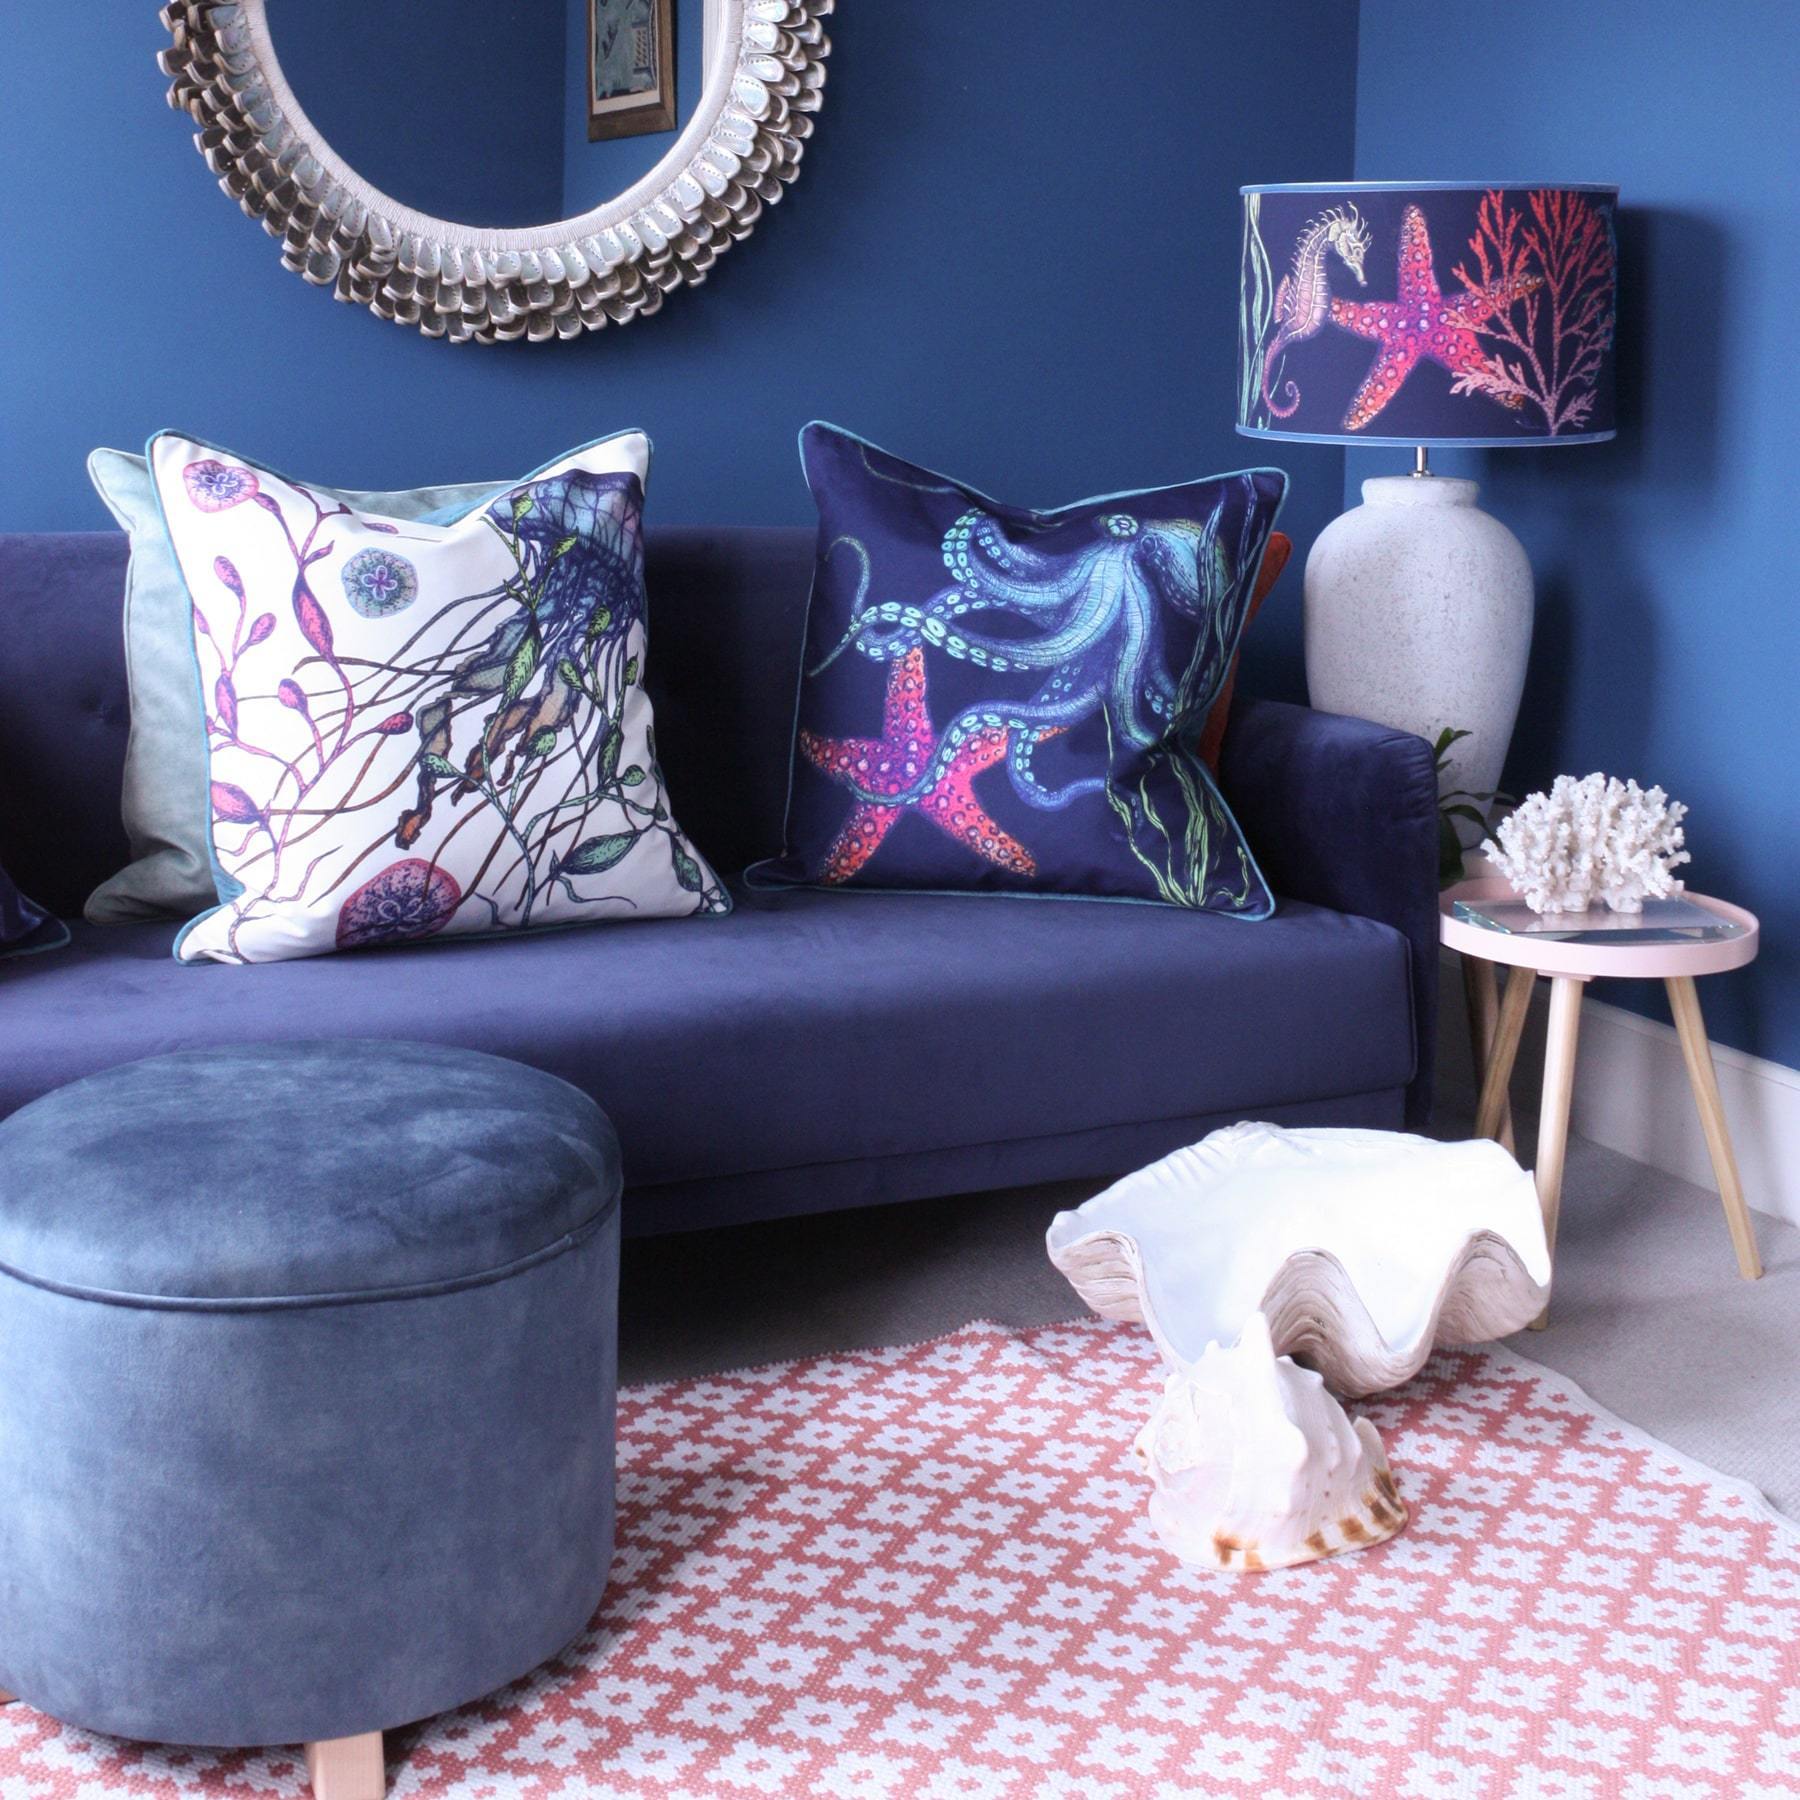 Rainbow Reef Navy Shade With Octopus,Seahorse,Starfish and Seaweed Design in bright colours on a white lampbase next to a navy sofa covered in our Reef cushions.Behind on the wall is a abalone mirror and in front of the sofa is a footstool and several shells on the floor. 